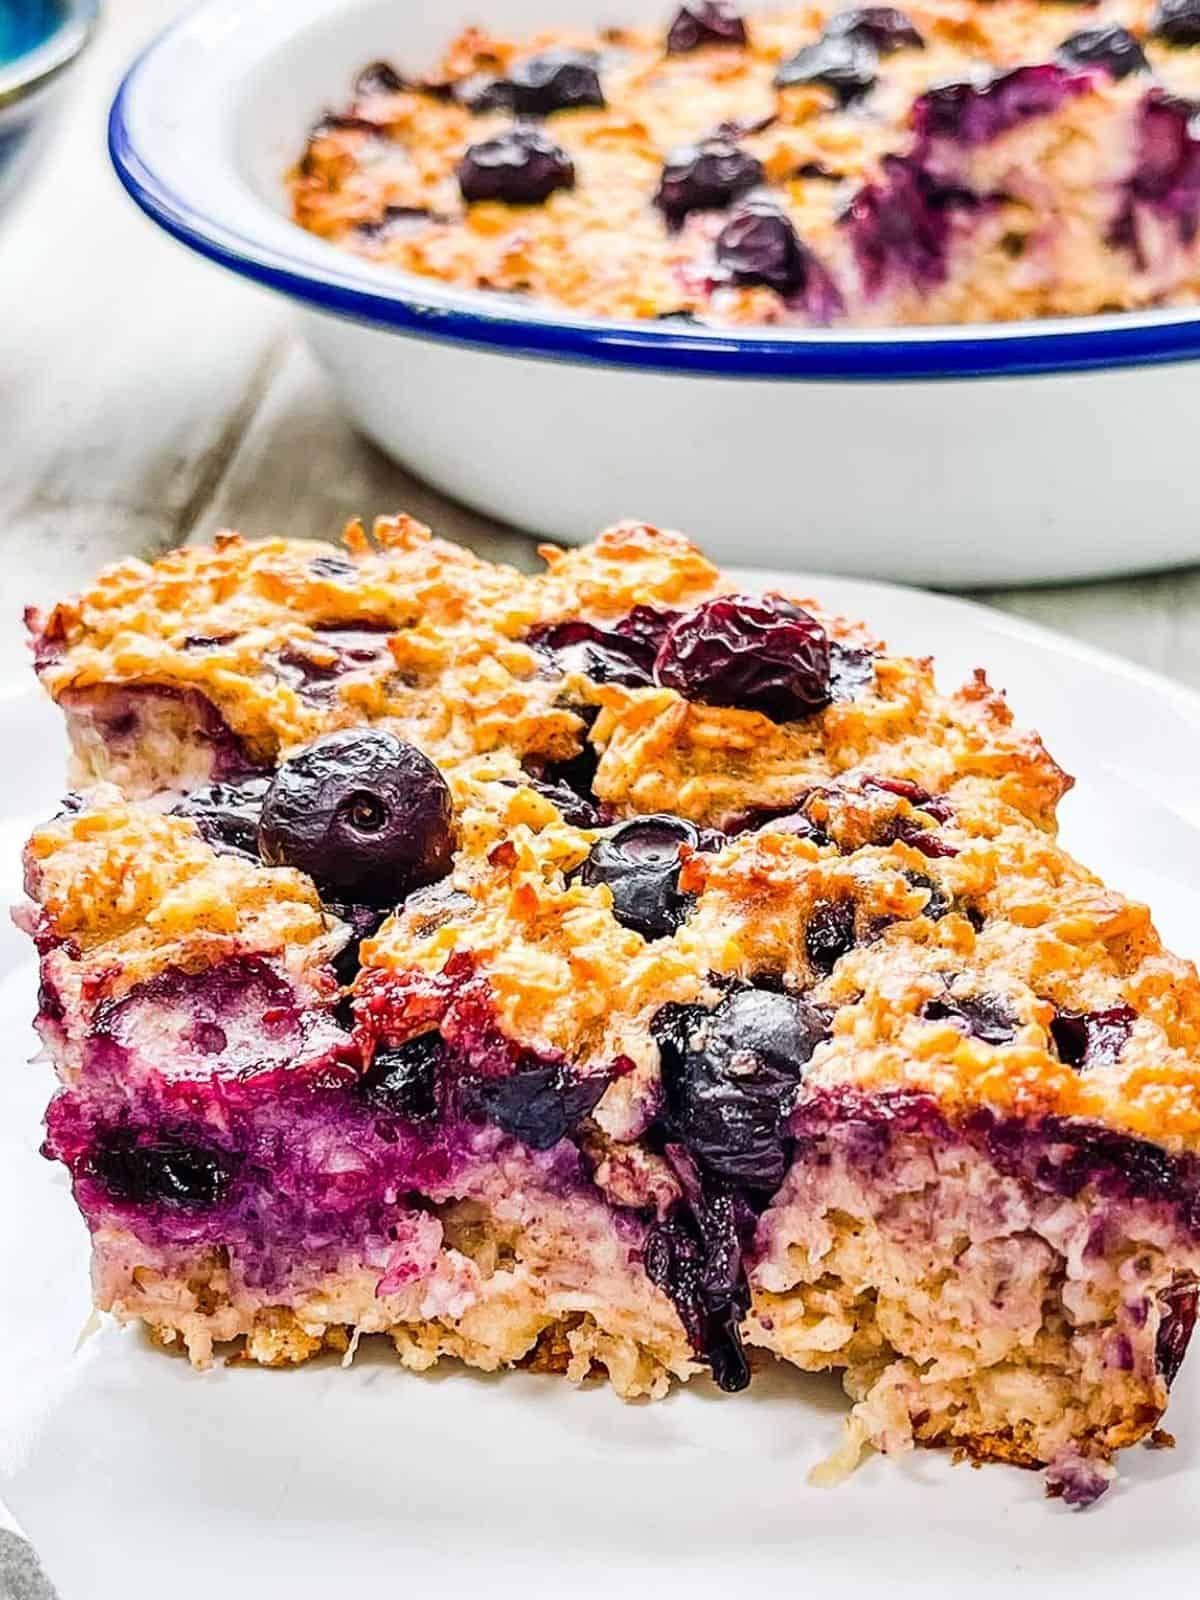 A slice of baked oatmeal with blueberries.